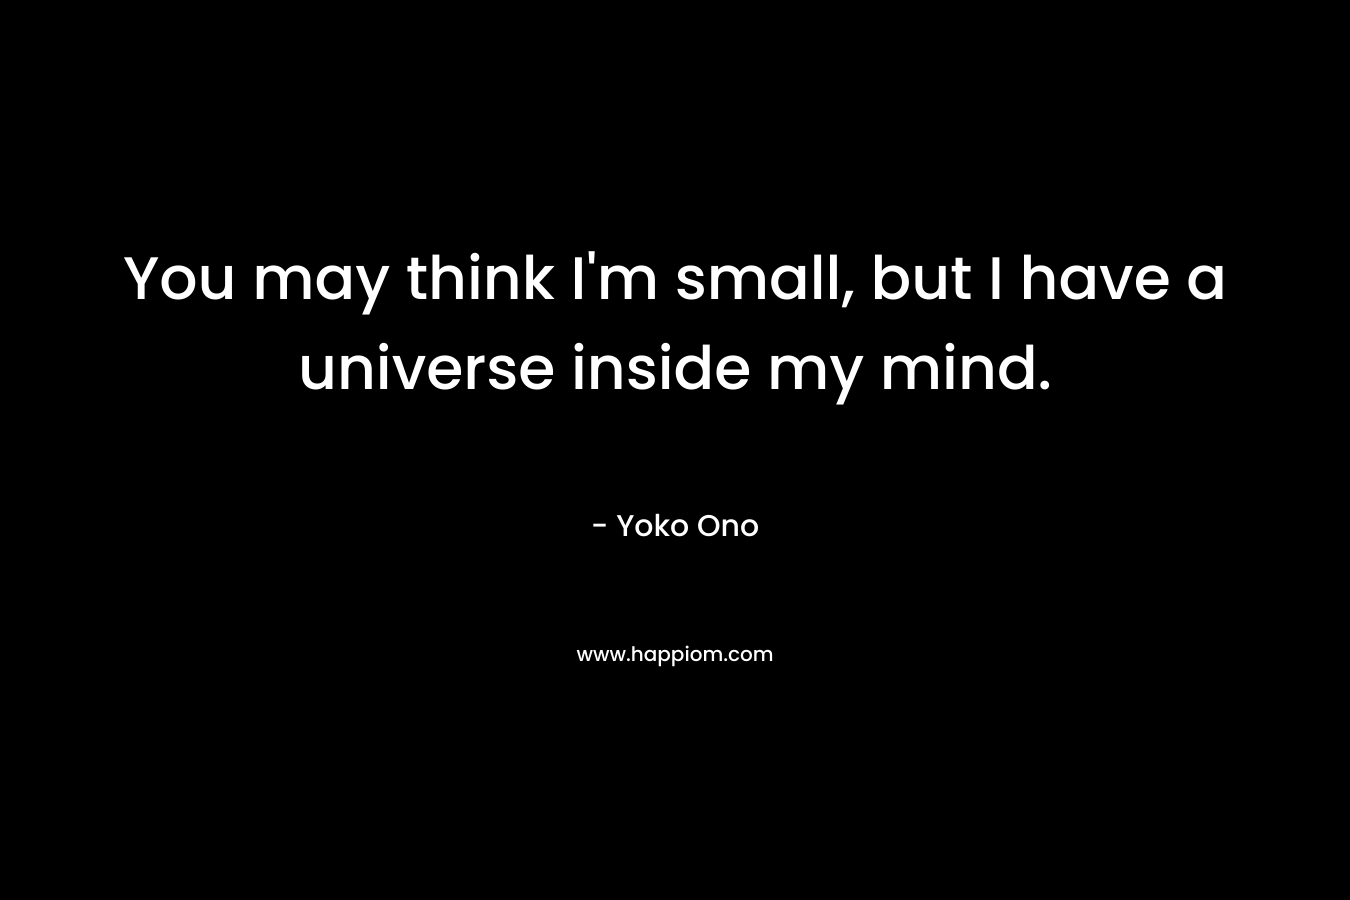 You may think I'm small, but I have a universe inside my mind.